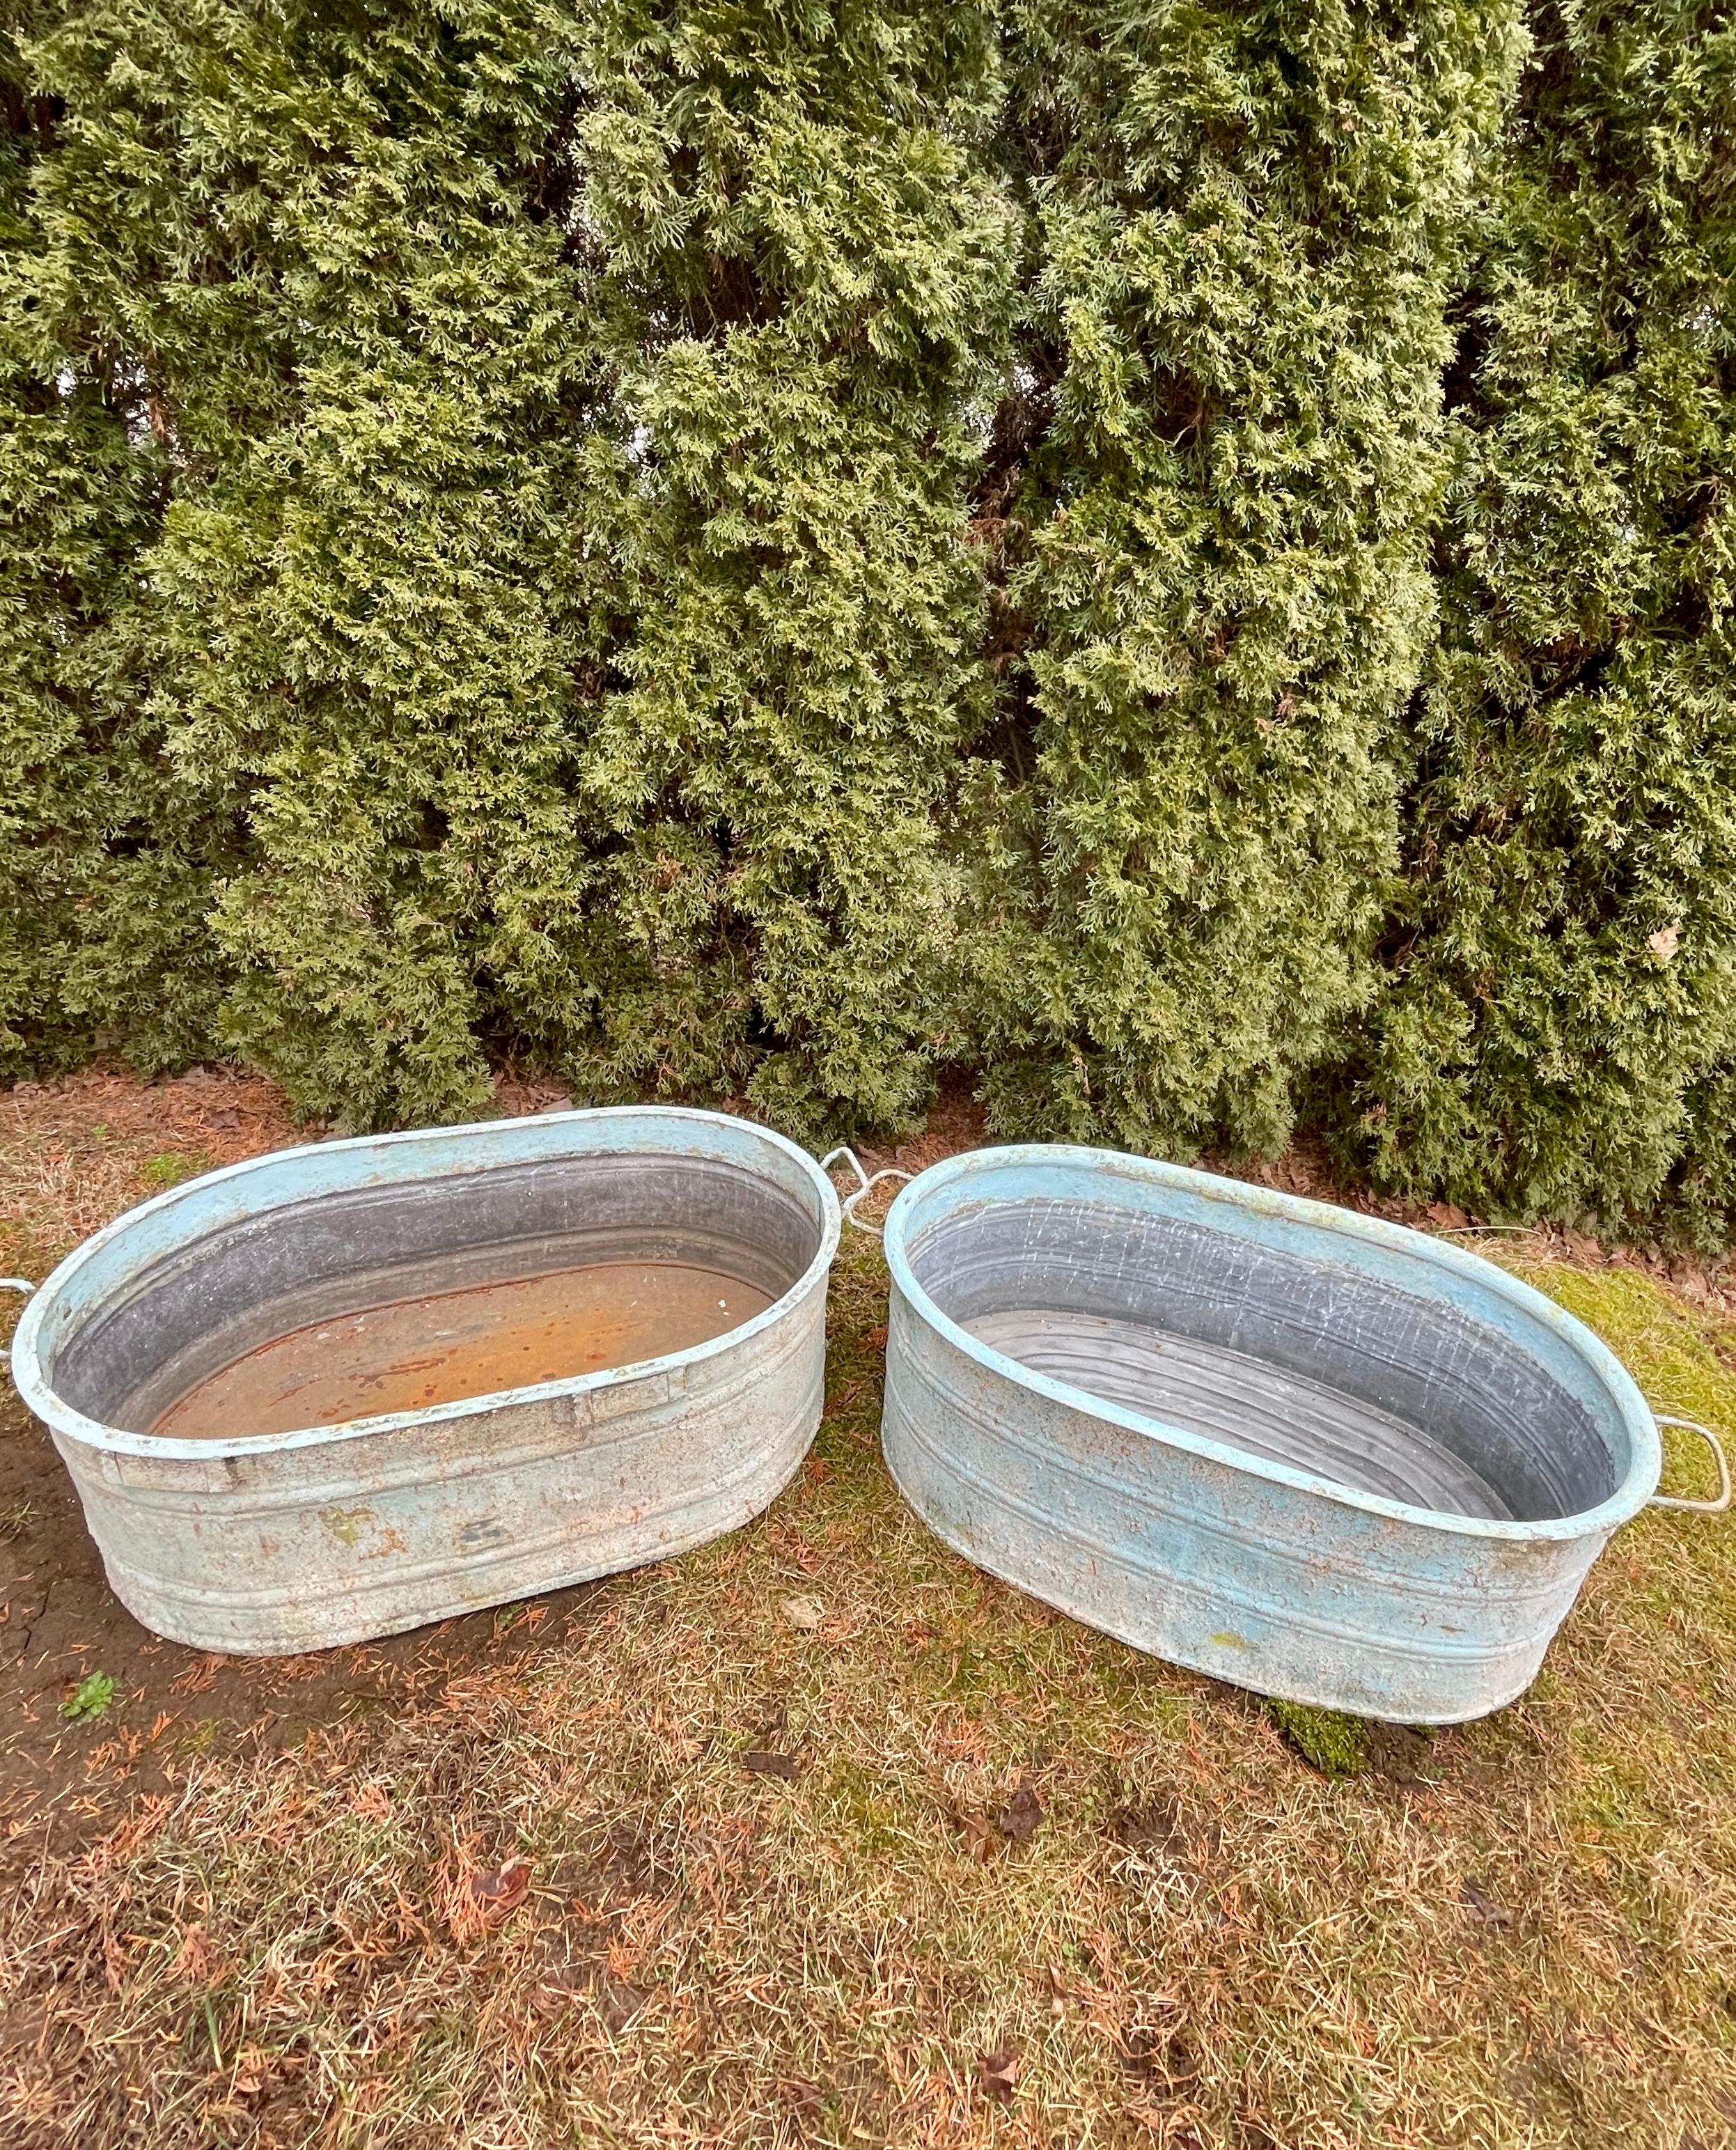 Industrial Near-Pair of Very Large German Oval Galvanized Planters #2 with Custom Surface For Sale